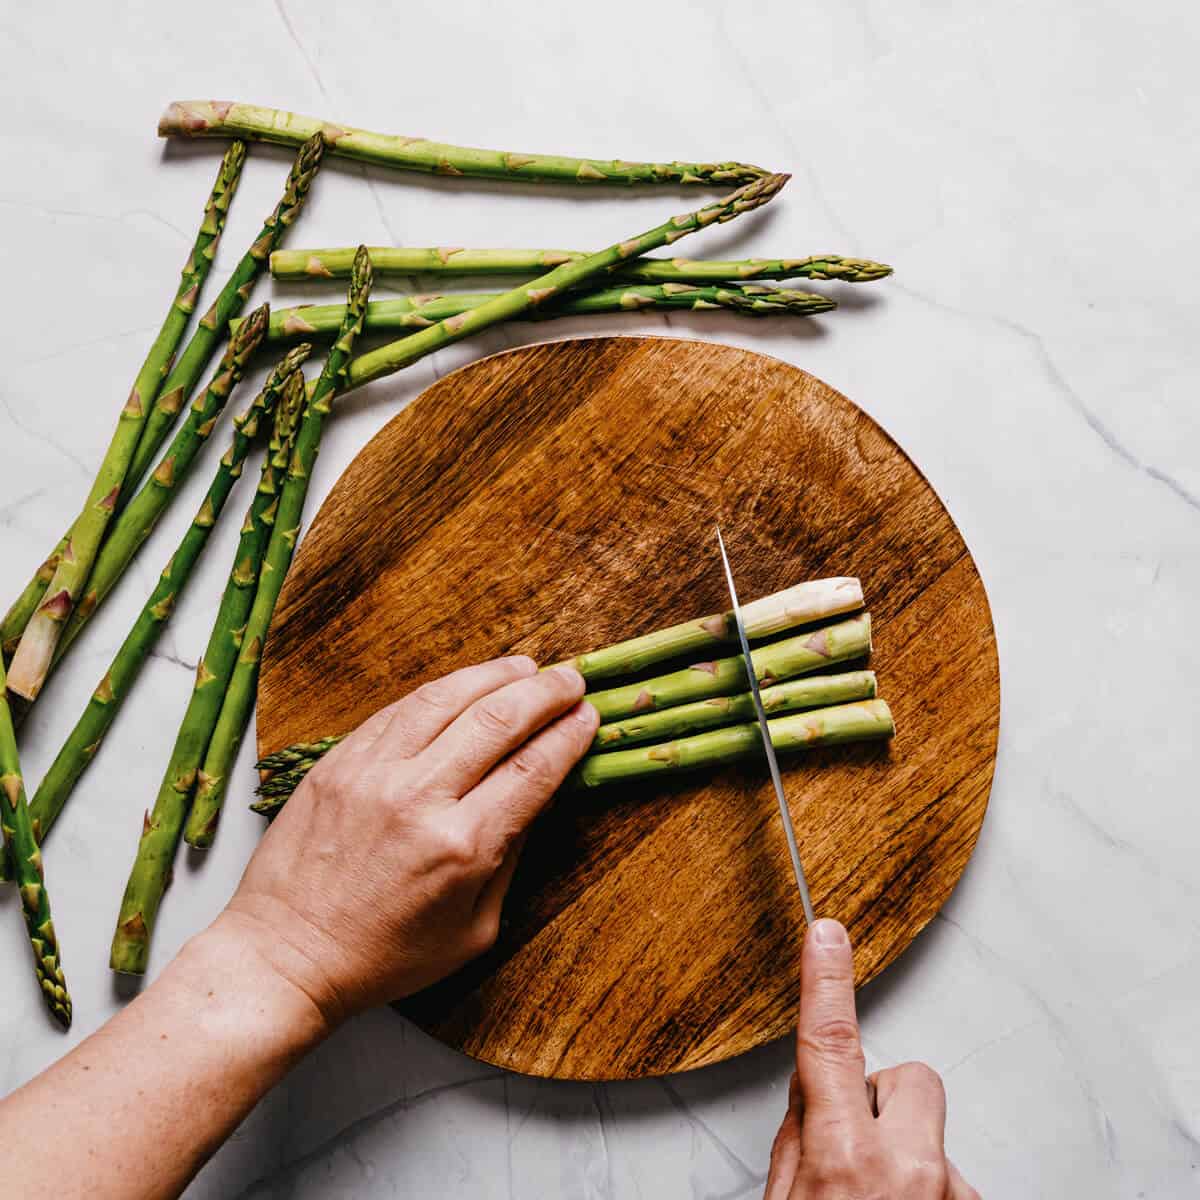 asparagus spears being cut with a knife on a round wooden chopping board.